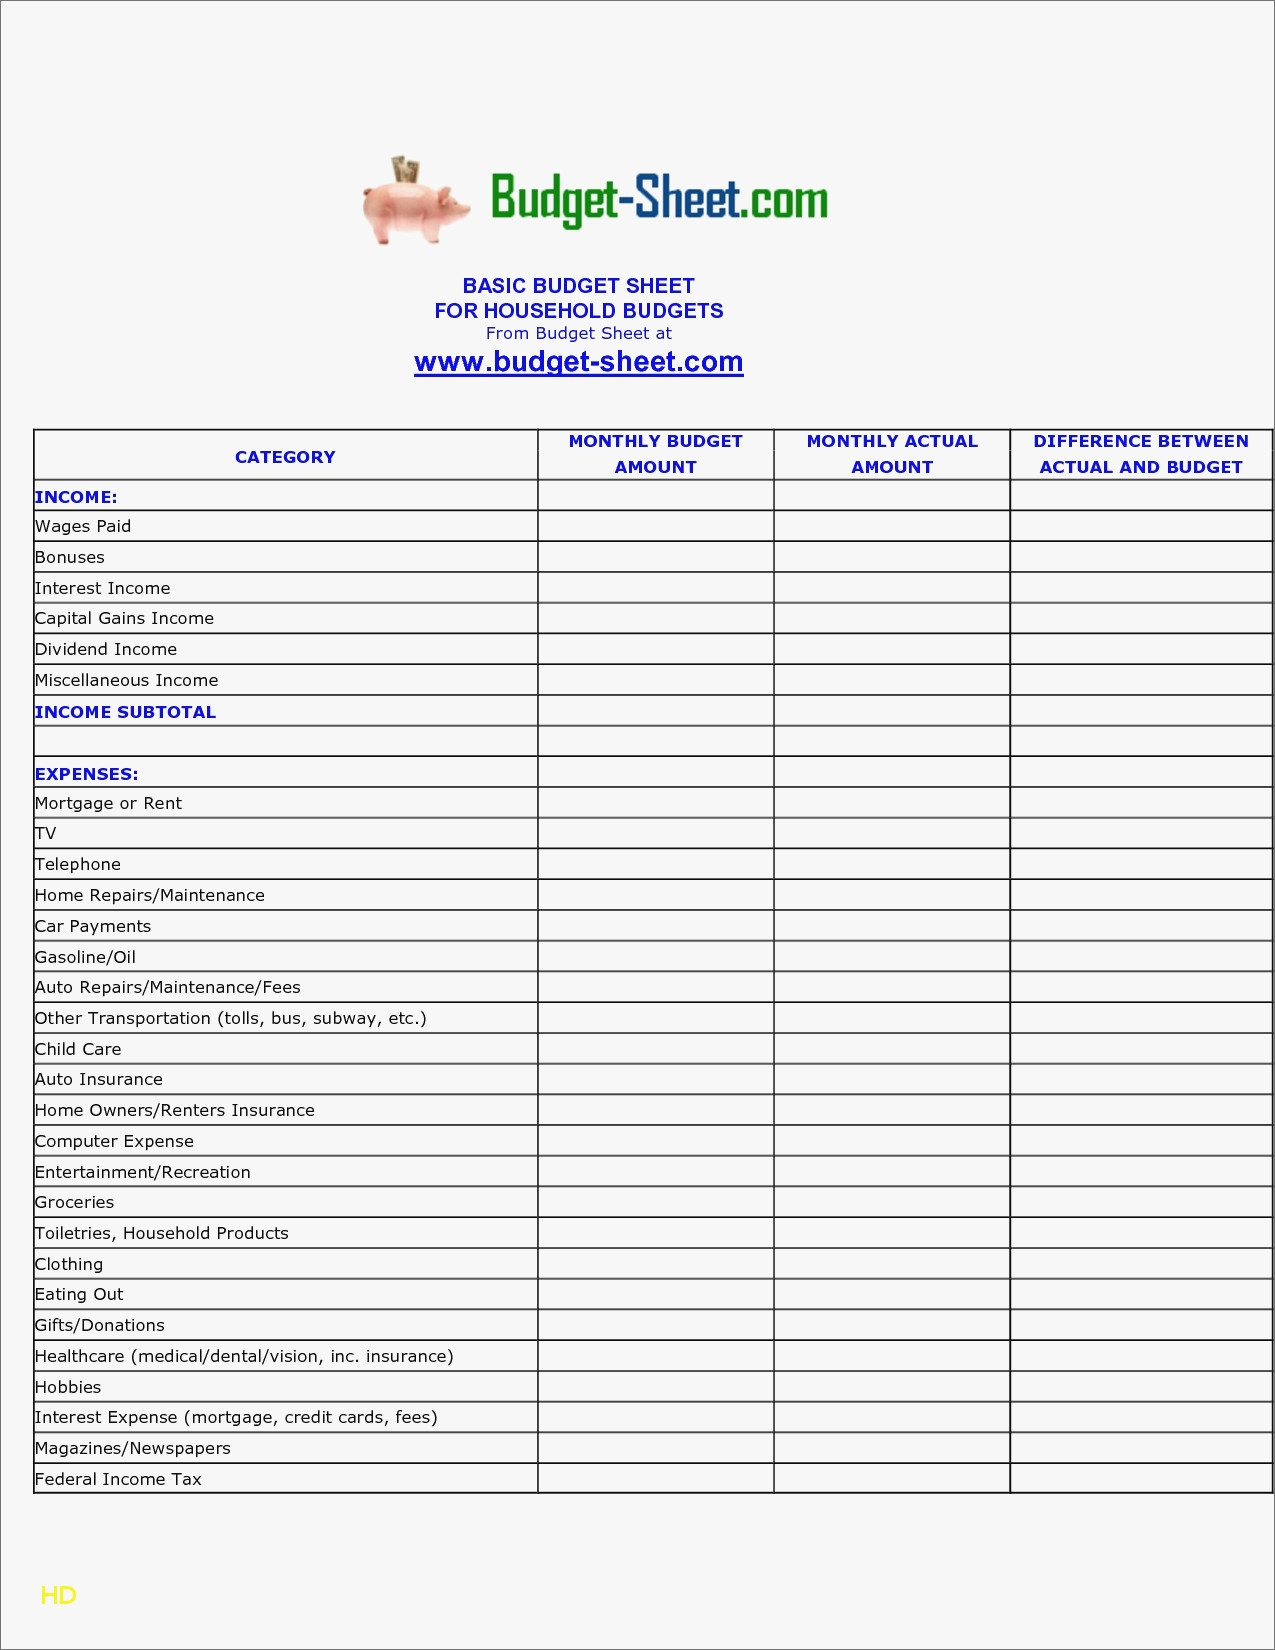 Home Contents Calculator Spreadsheet For Debt Elimination Spreadsheet Sample Worksheets Free Snowball